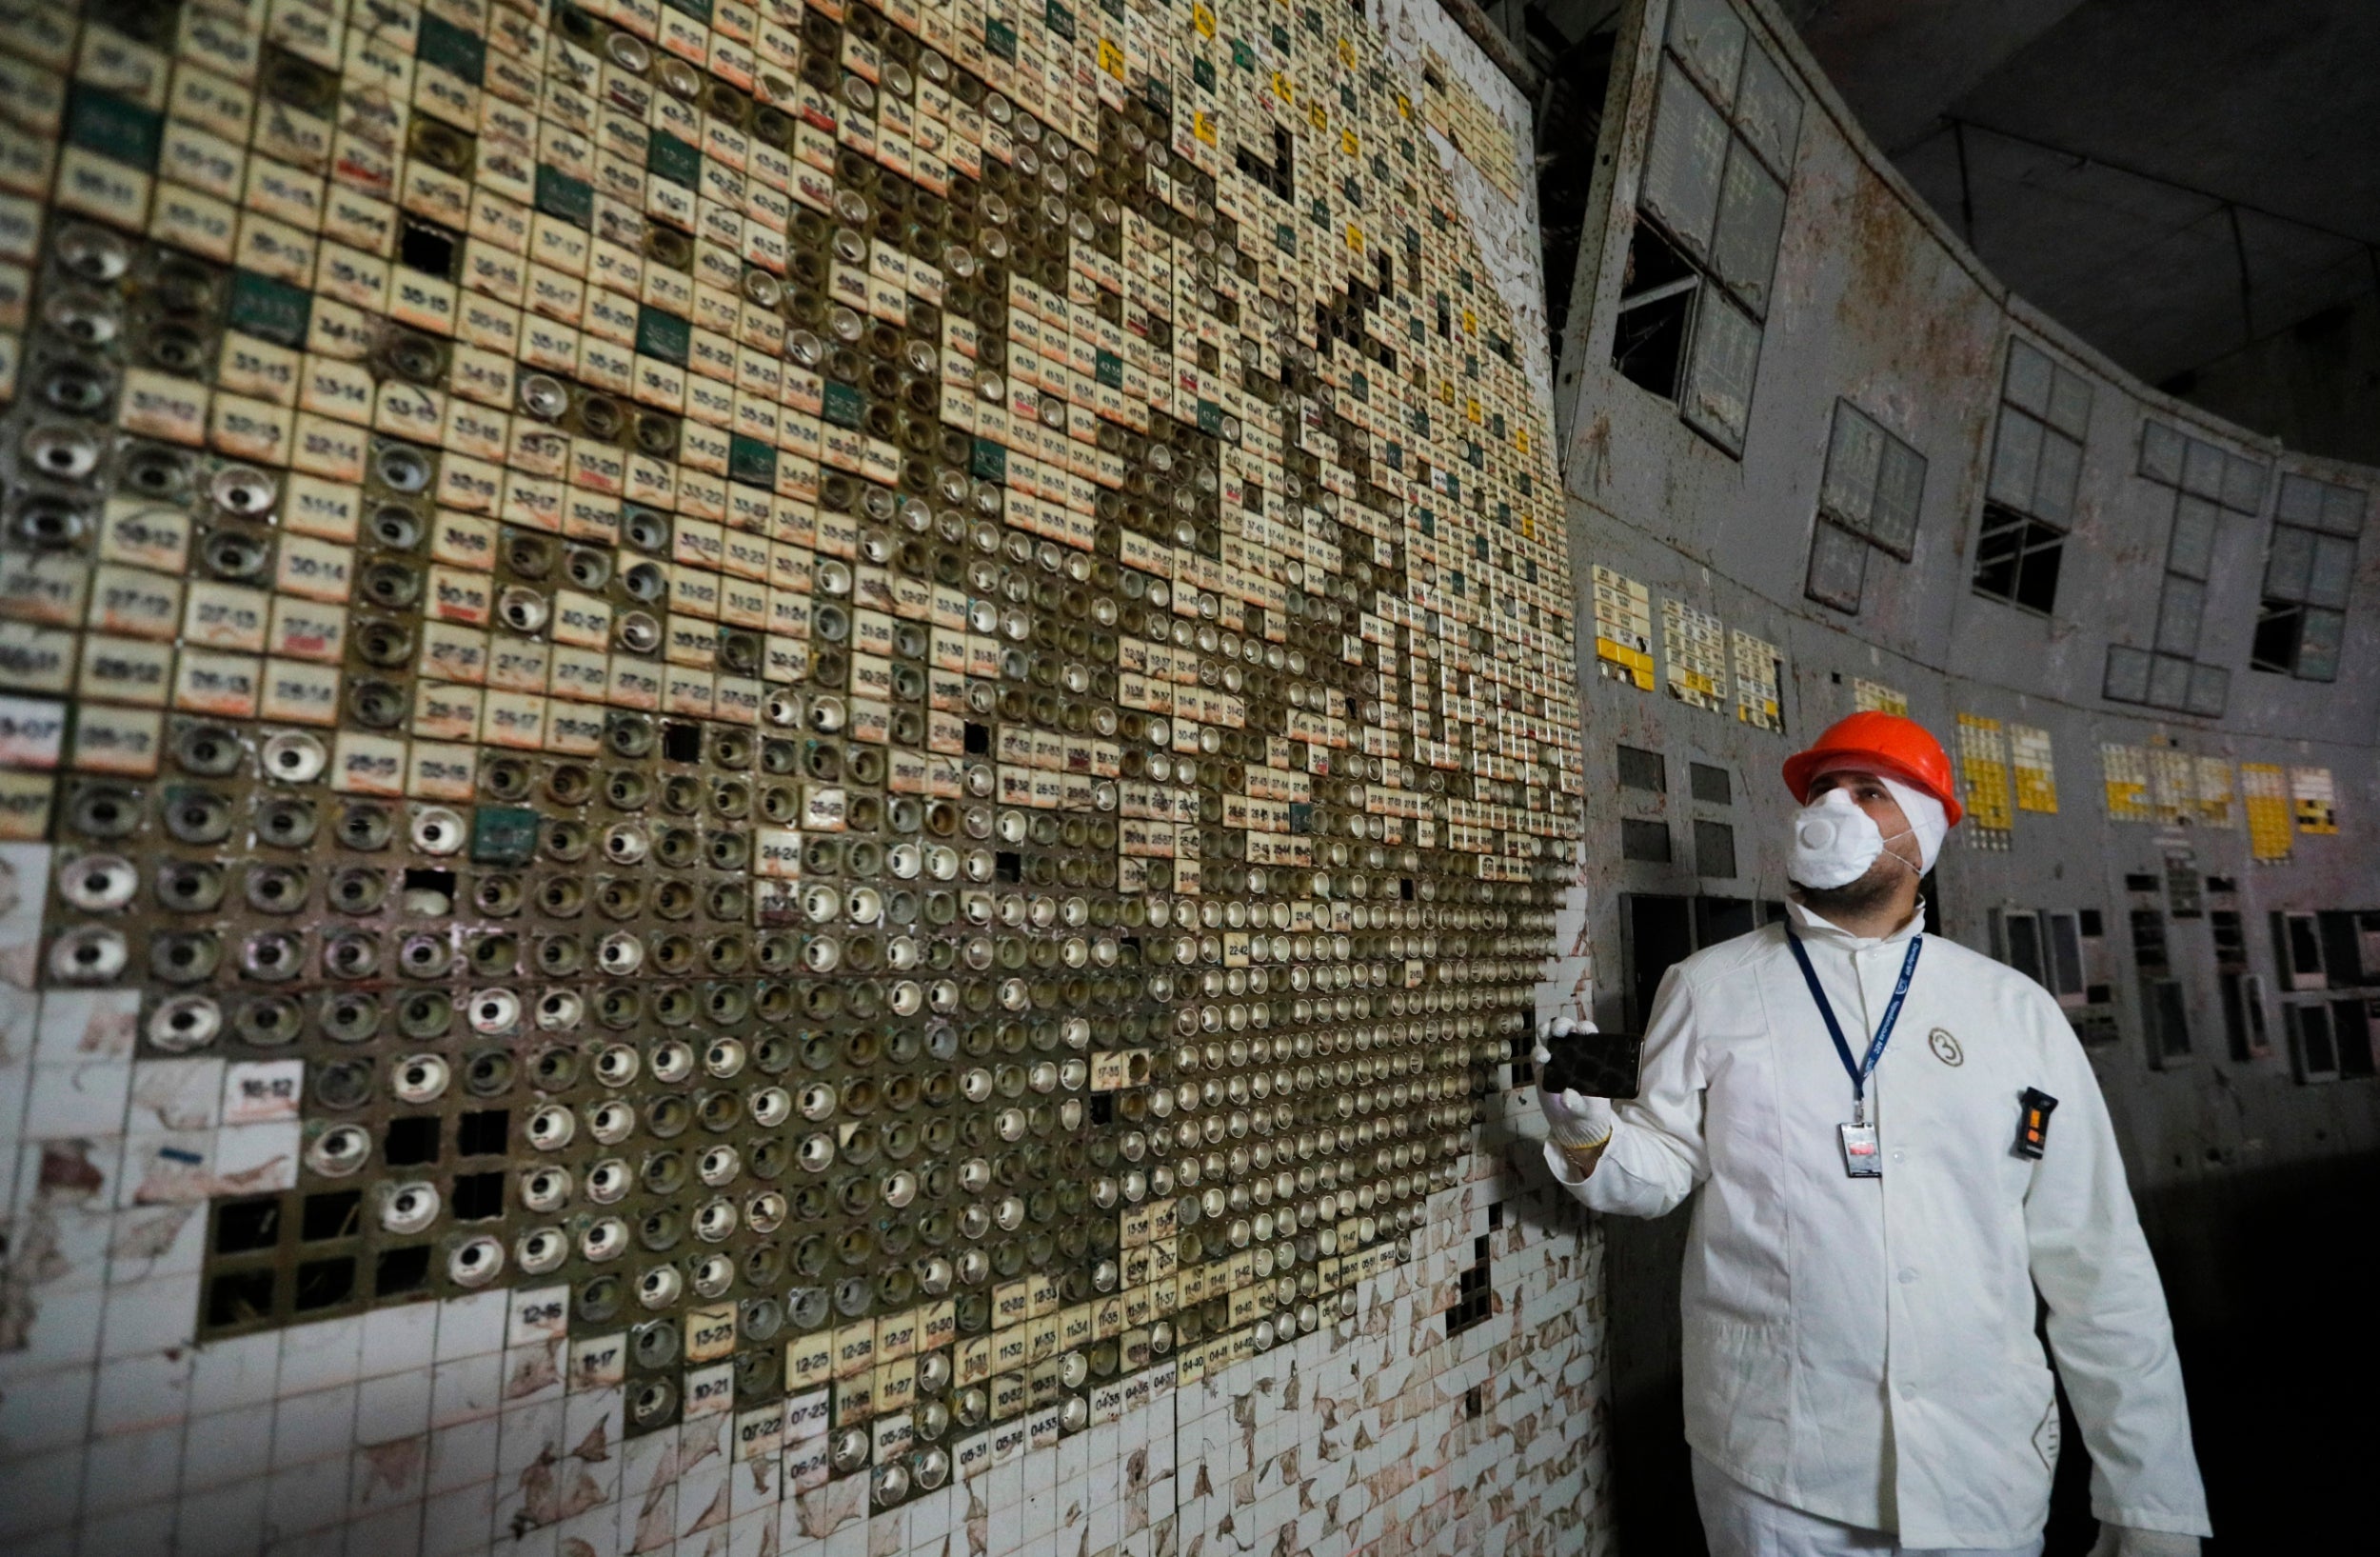 Journalists visit the control room of the plant's fourth reactor at the Chernobyl nuclear power plant